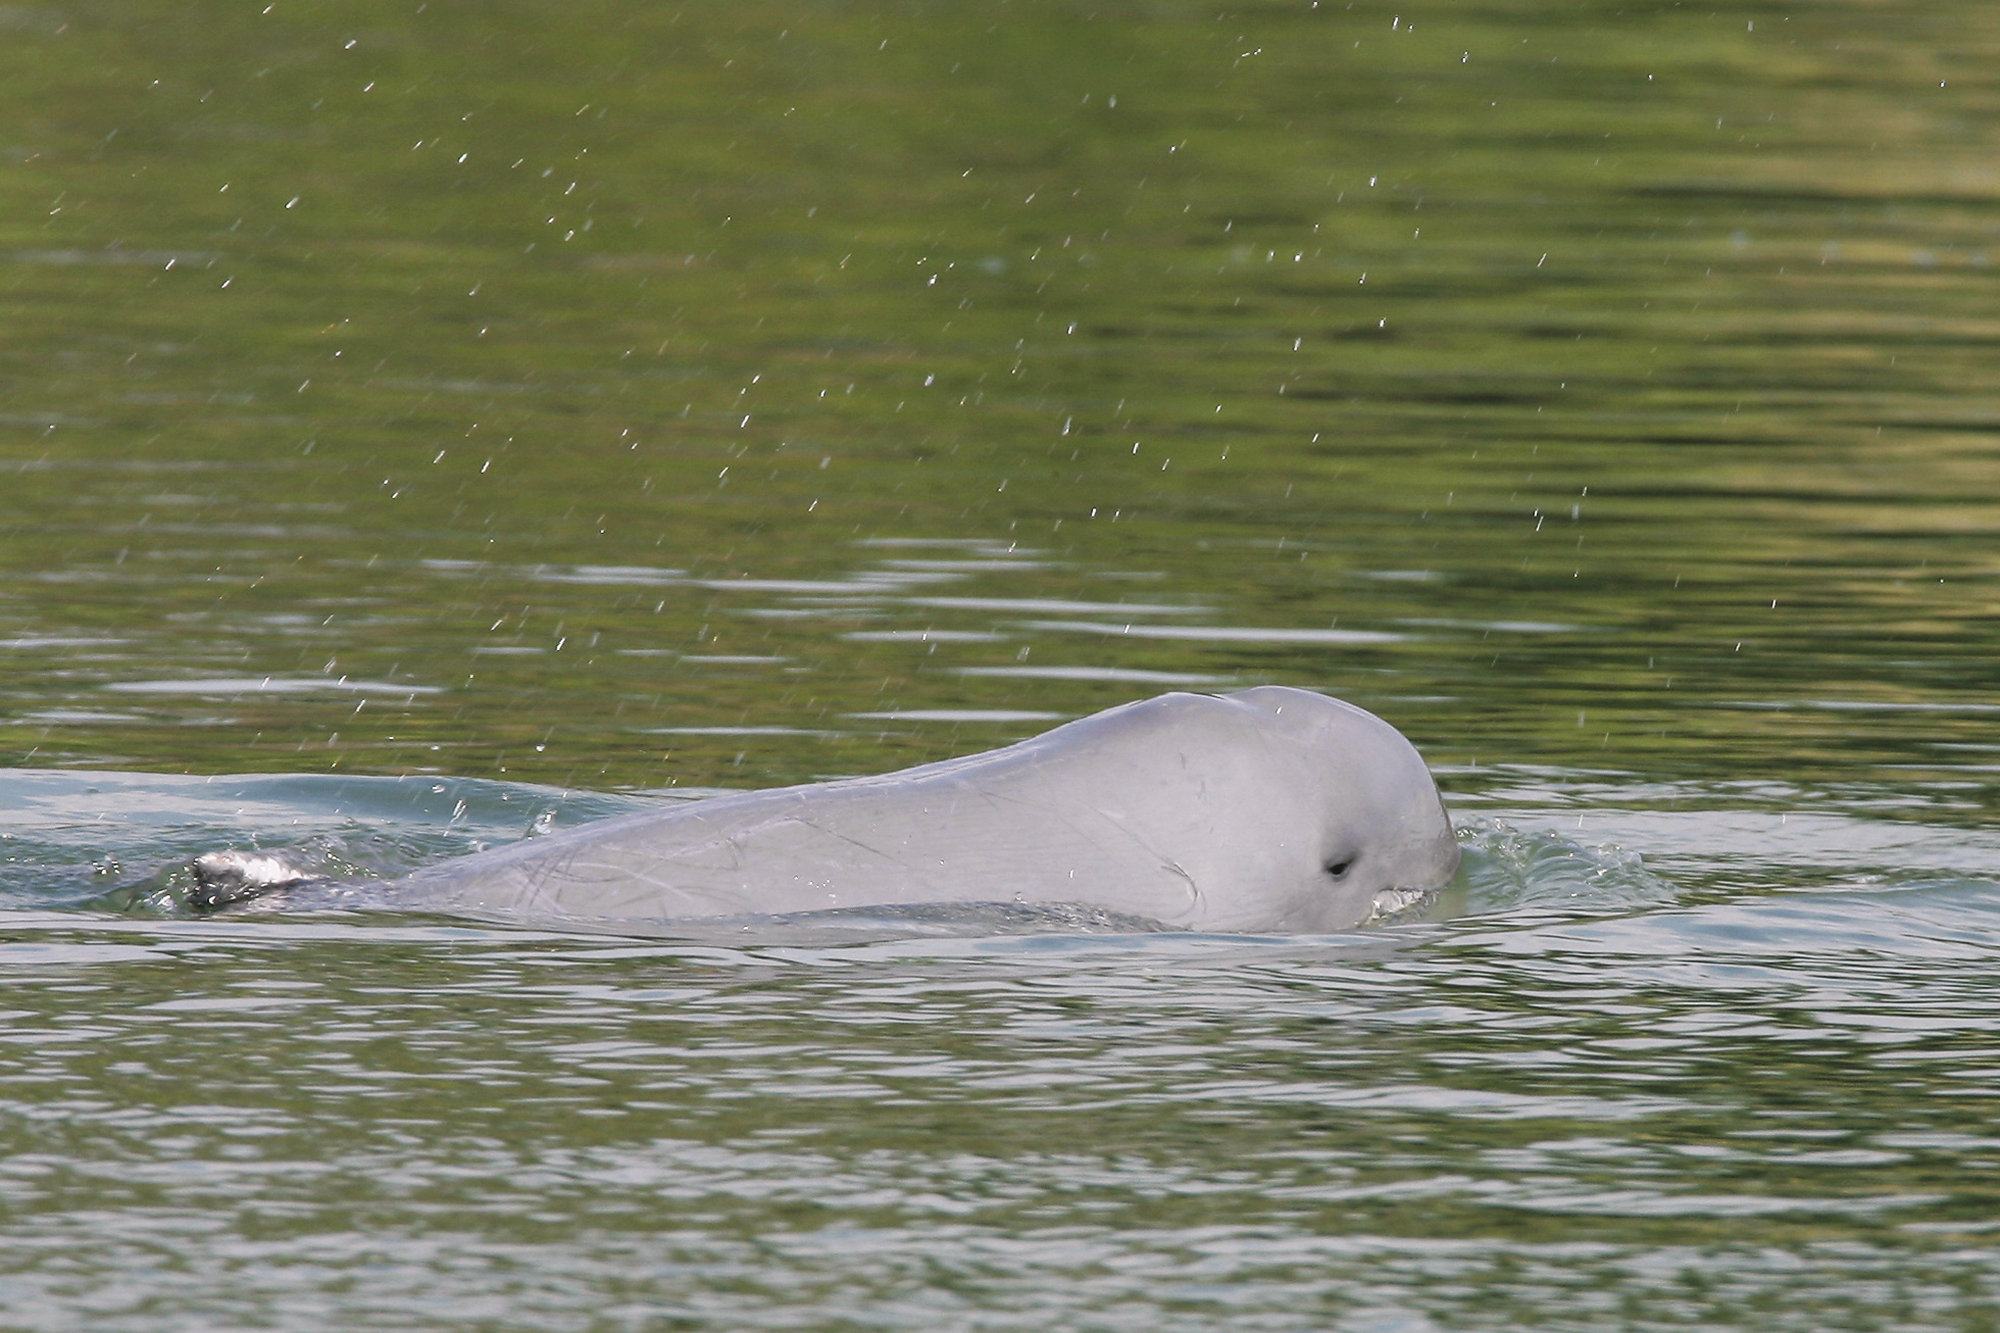 A Mekong River dolphin appears on the Mekong River at Kampi village, Cambodia, on March 17, 2009.